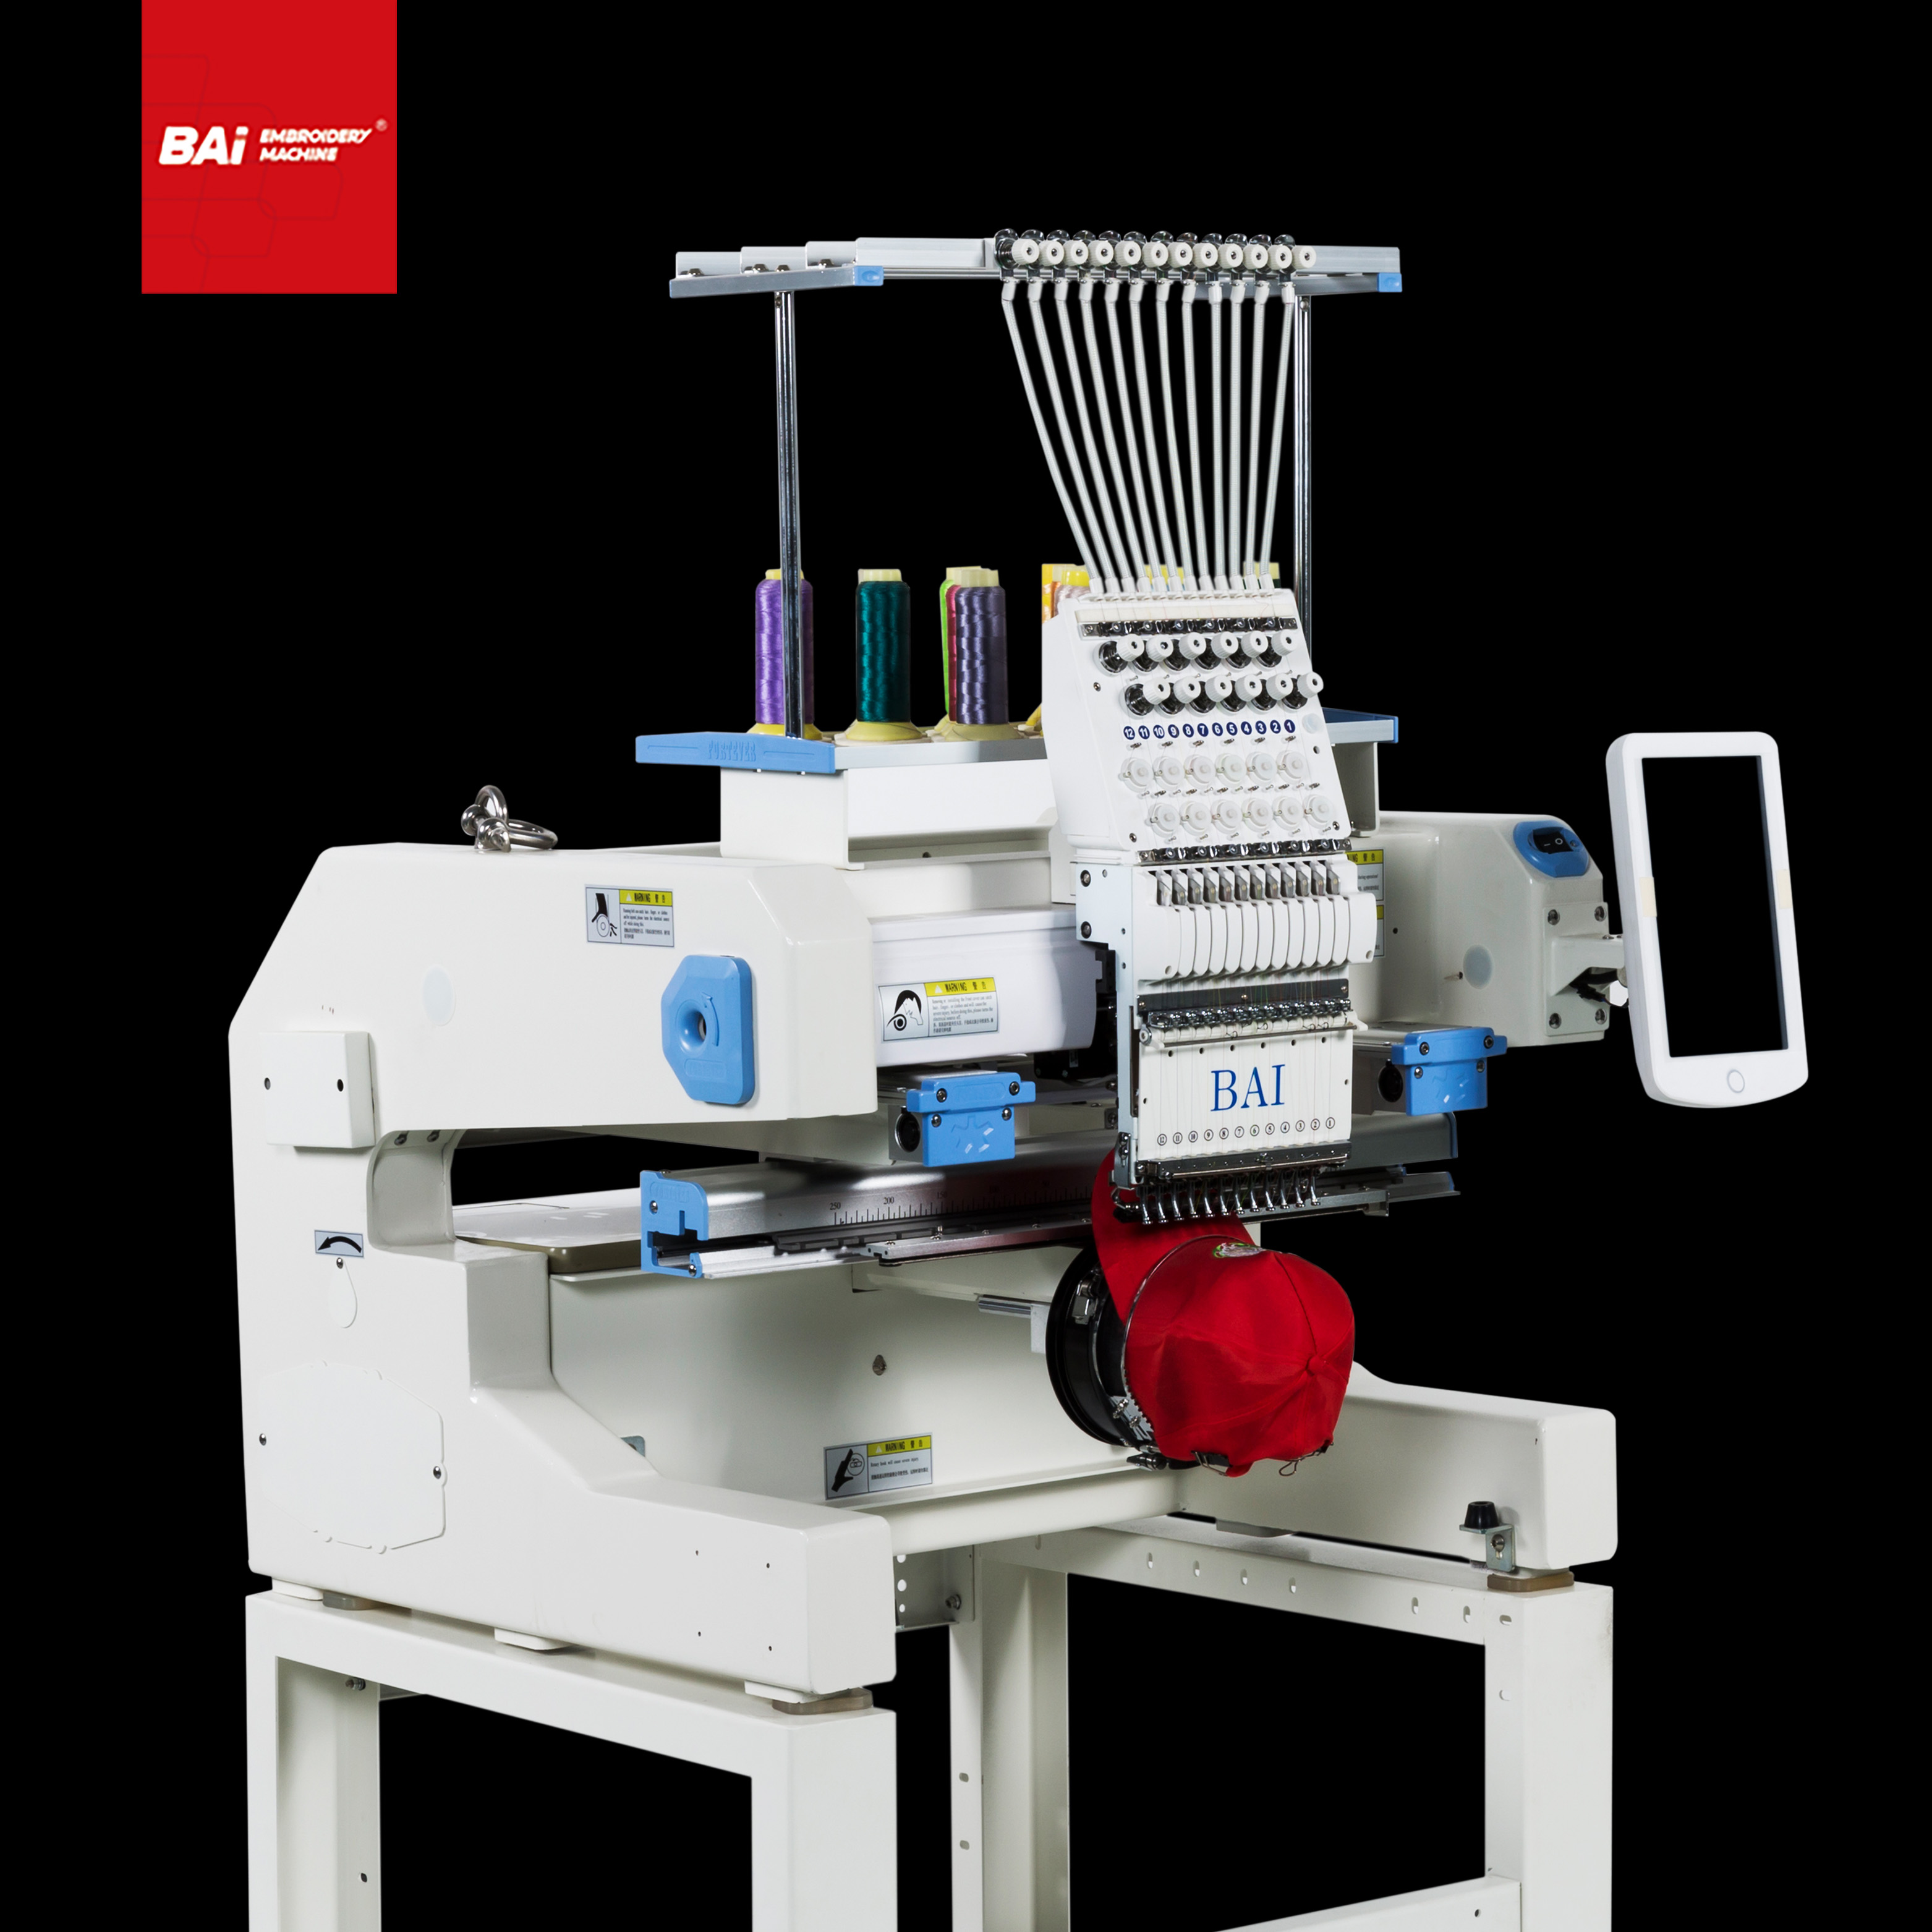 BAI Common Speed Garments Shirt Computerized Embroidery Machine for Houssehold